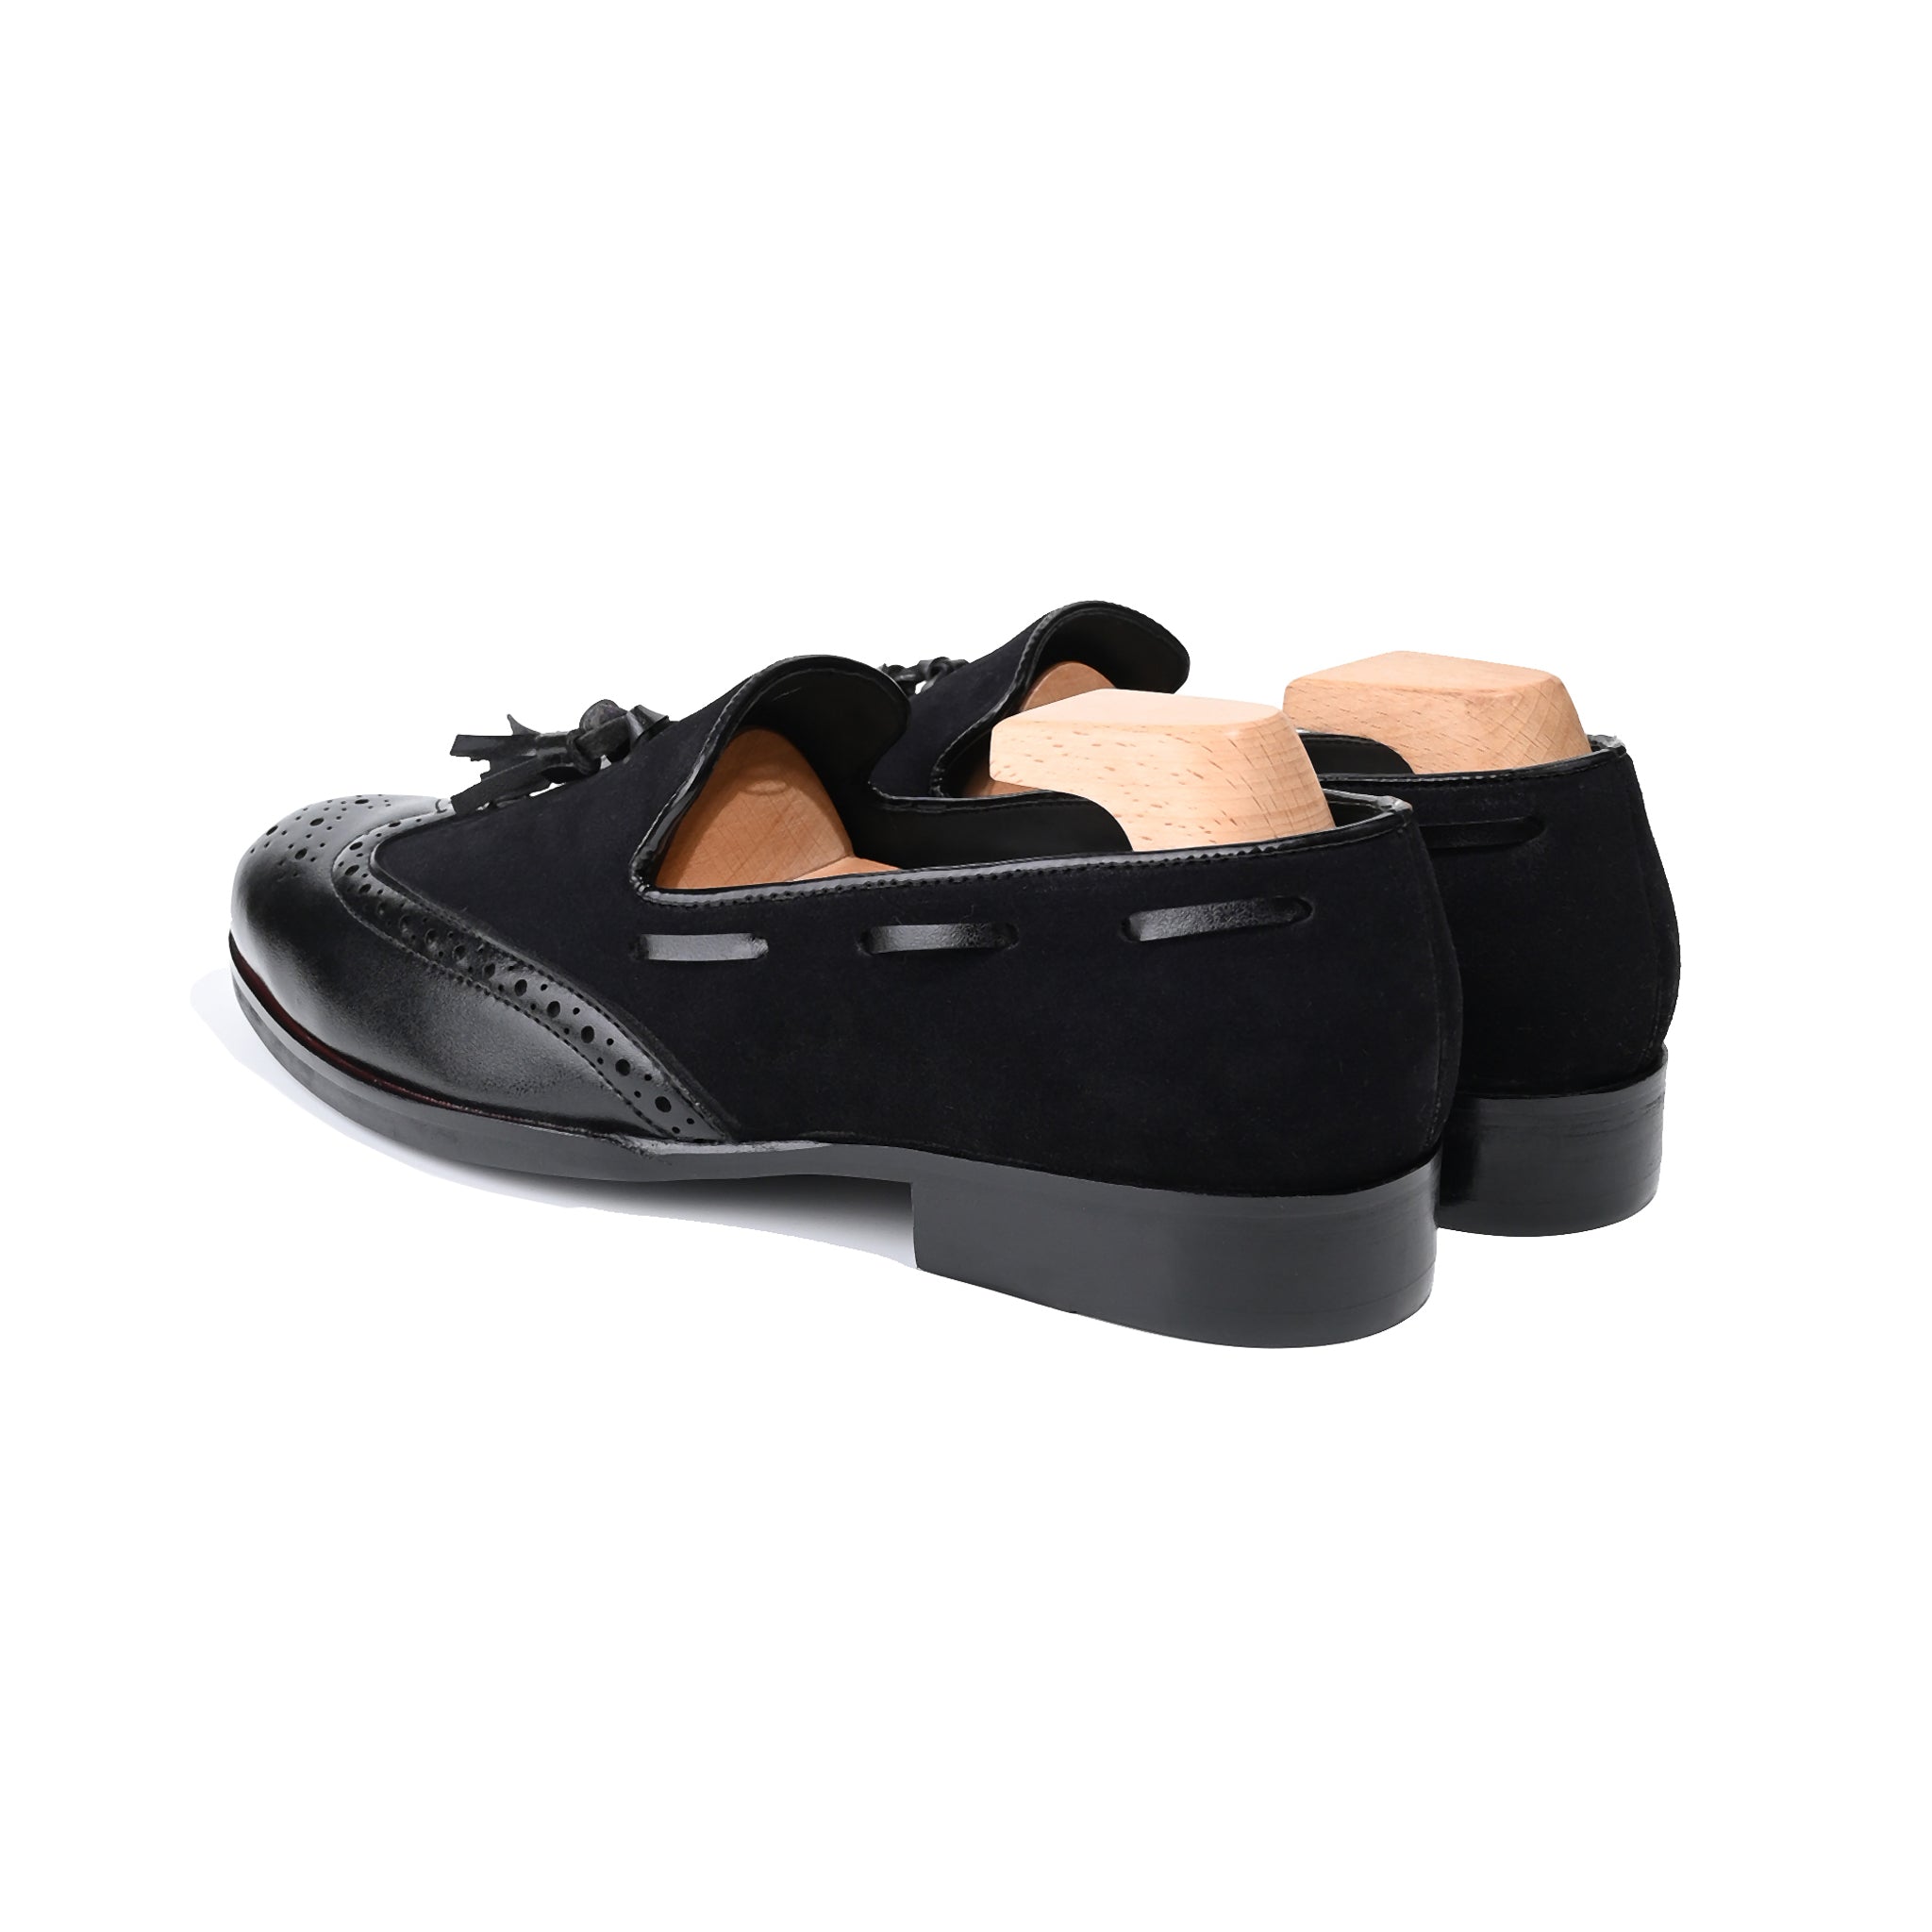 Black Leather Suede Tassel Loafers